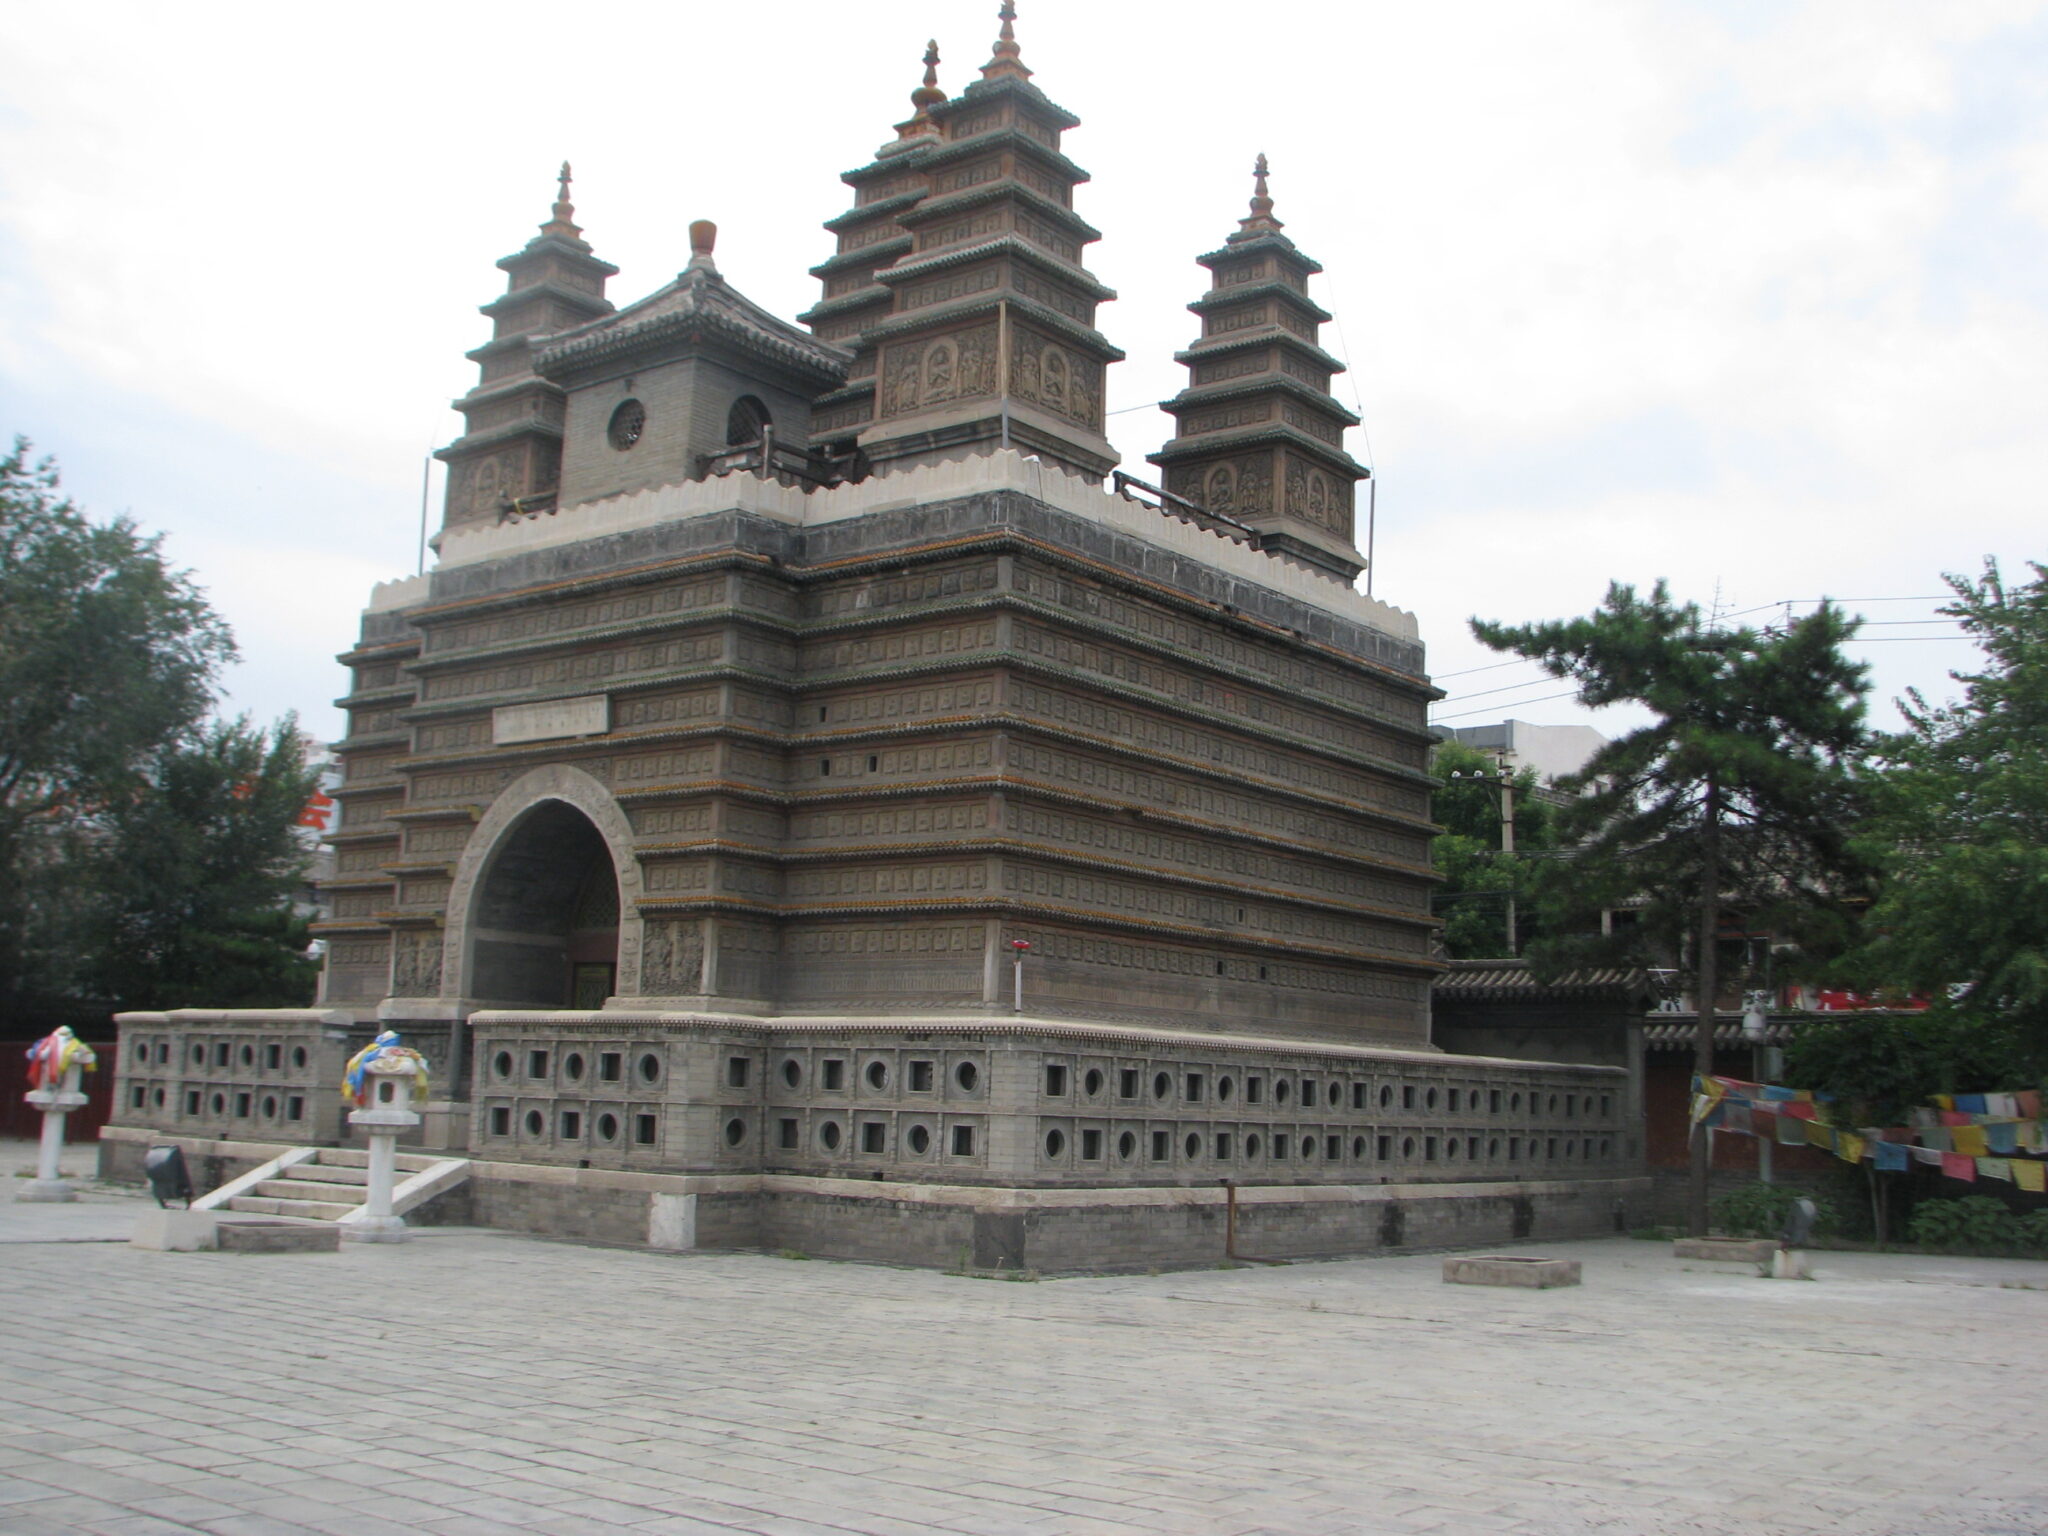 Wide view of gray stone building featuring square base with repeated horizontal moldings and multiple pagodas on roof